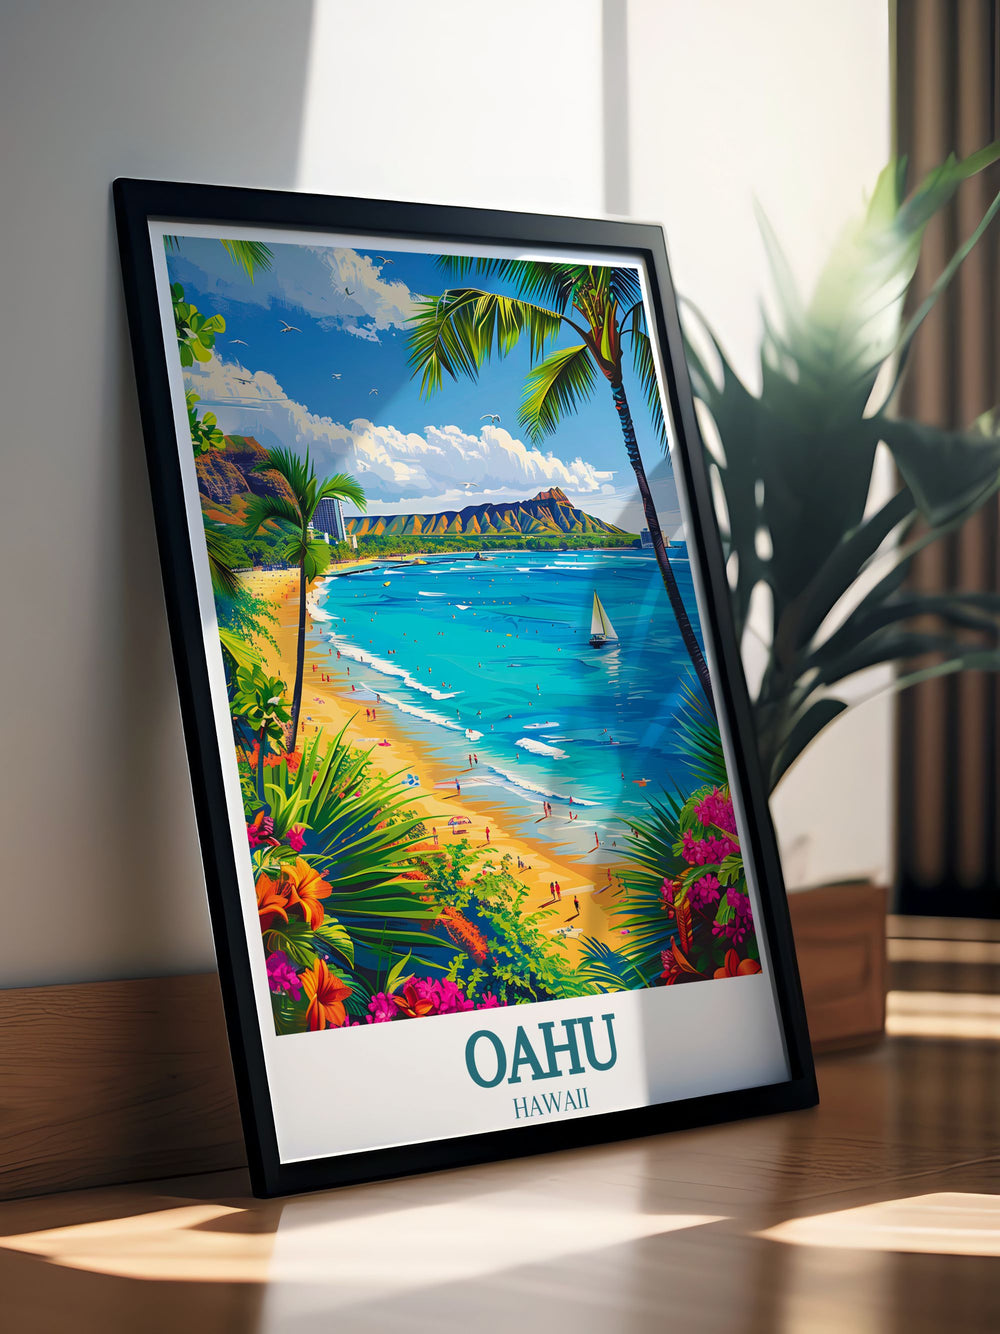 Oahu poster featuring the iconic Waikiki Beach and Diamond Head Crater offers a beautiful depiction of these famous Hawaiian landmarks ideal for travel enthusiasts and art lovers alike.